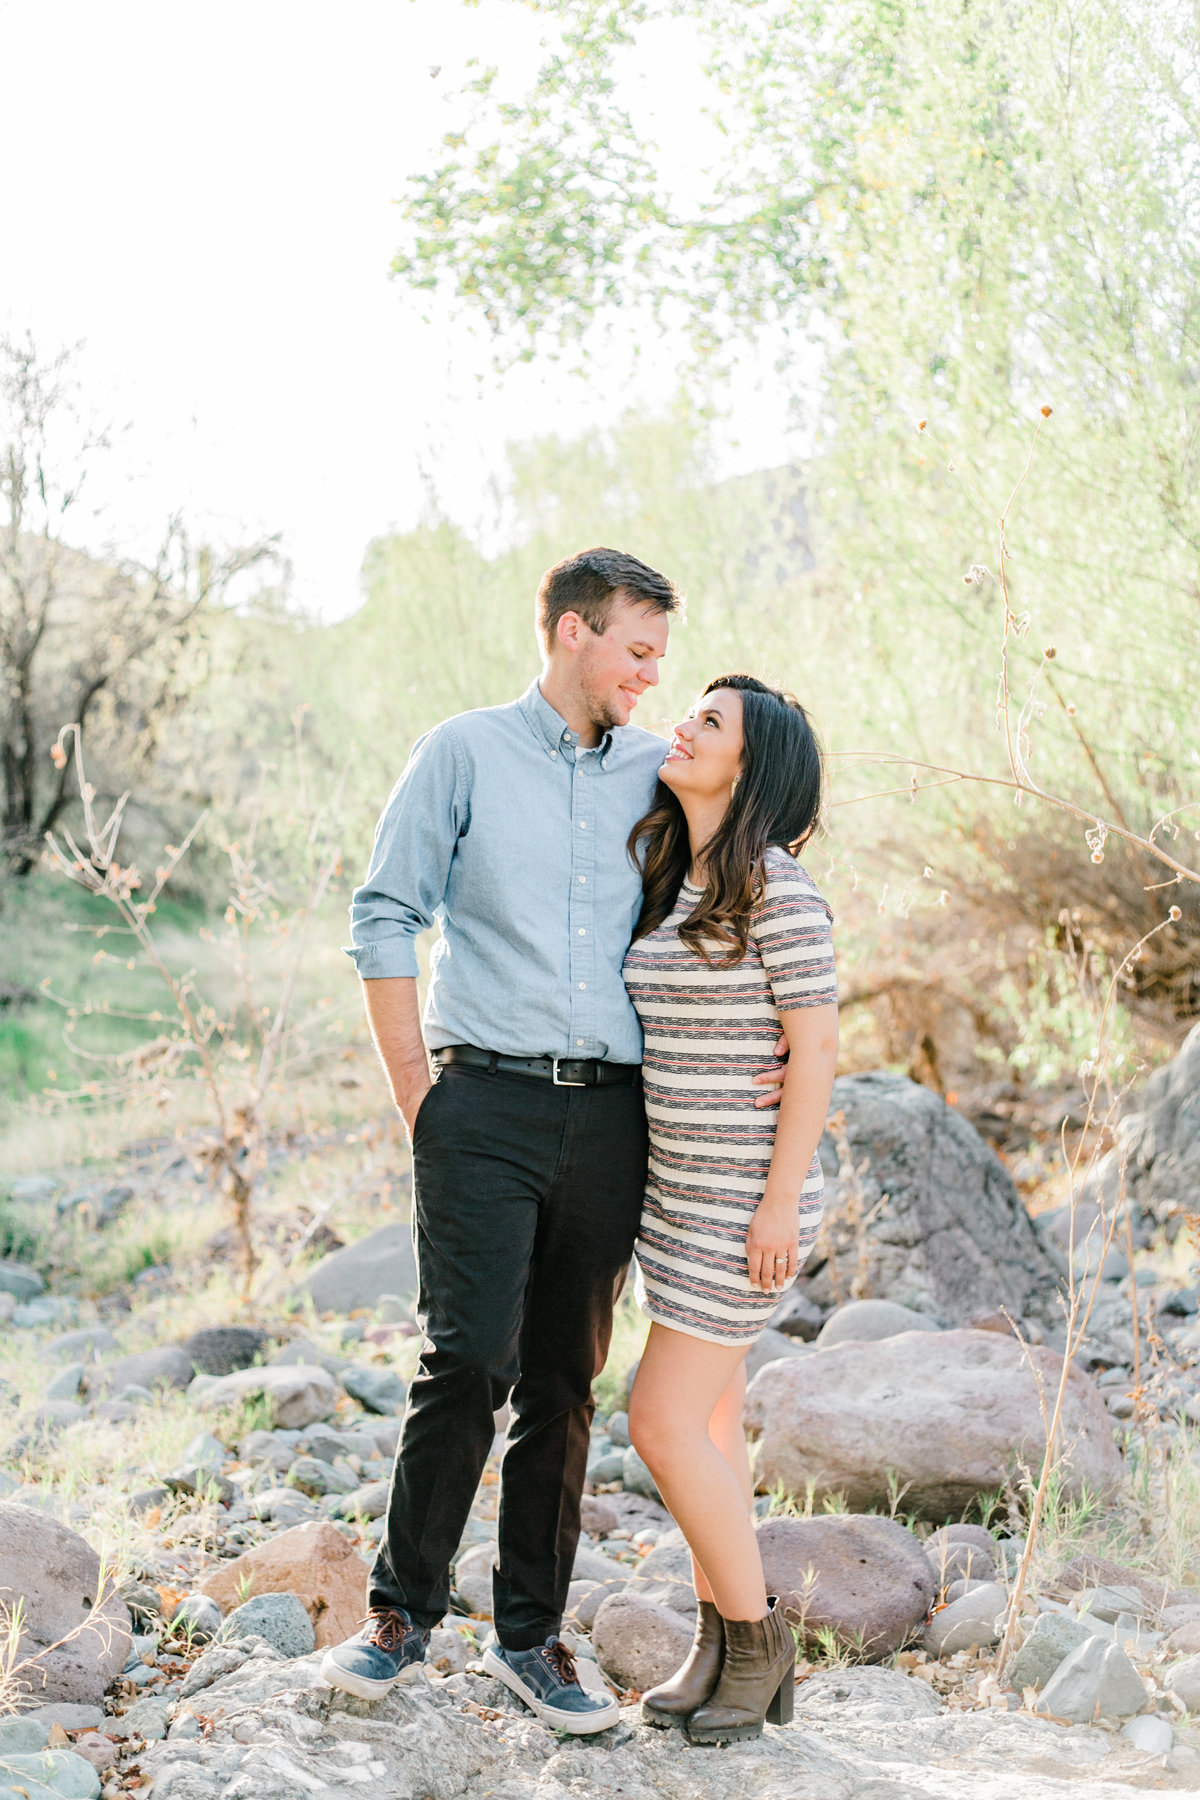 Karlie Colleen Photography - Claire & PJ - Engagement Session-213